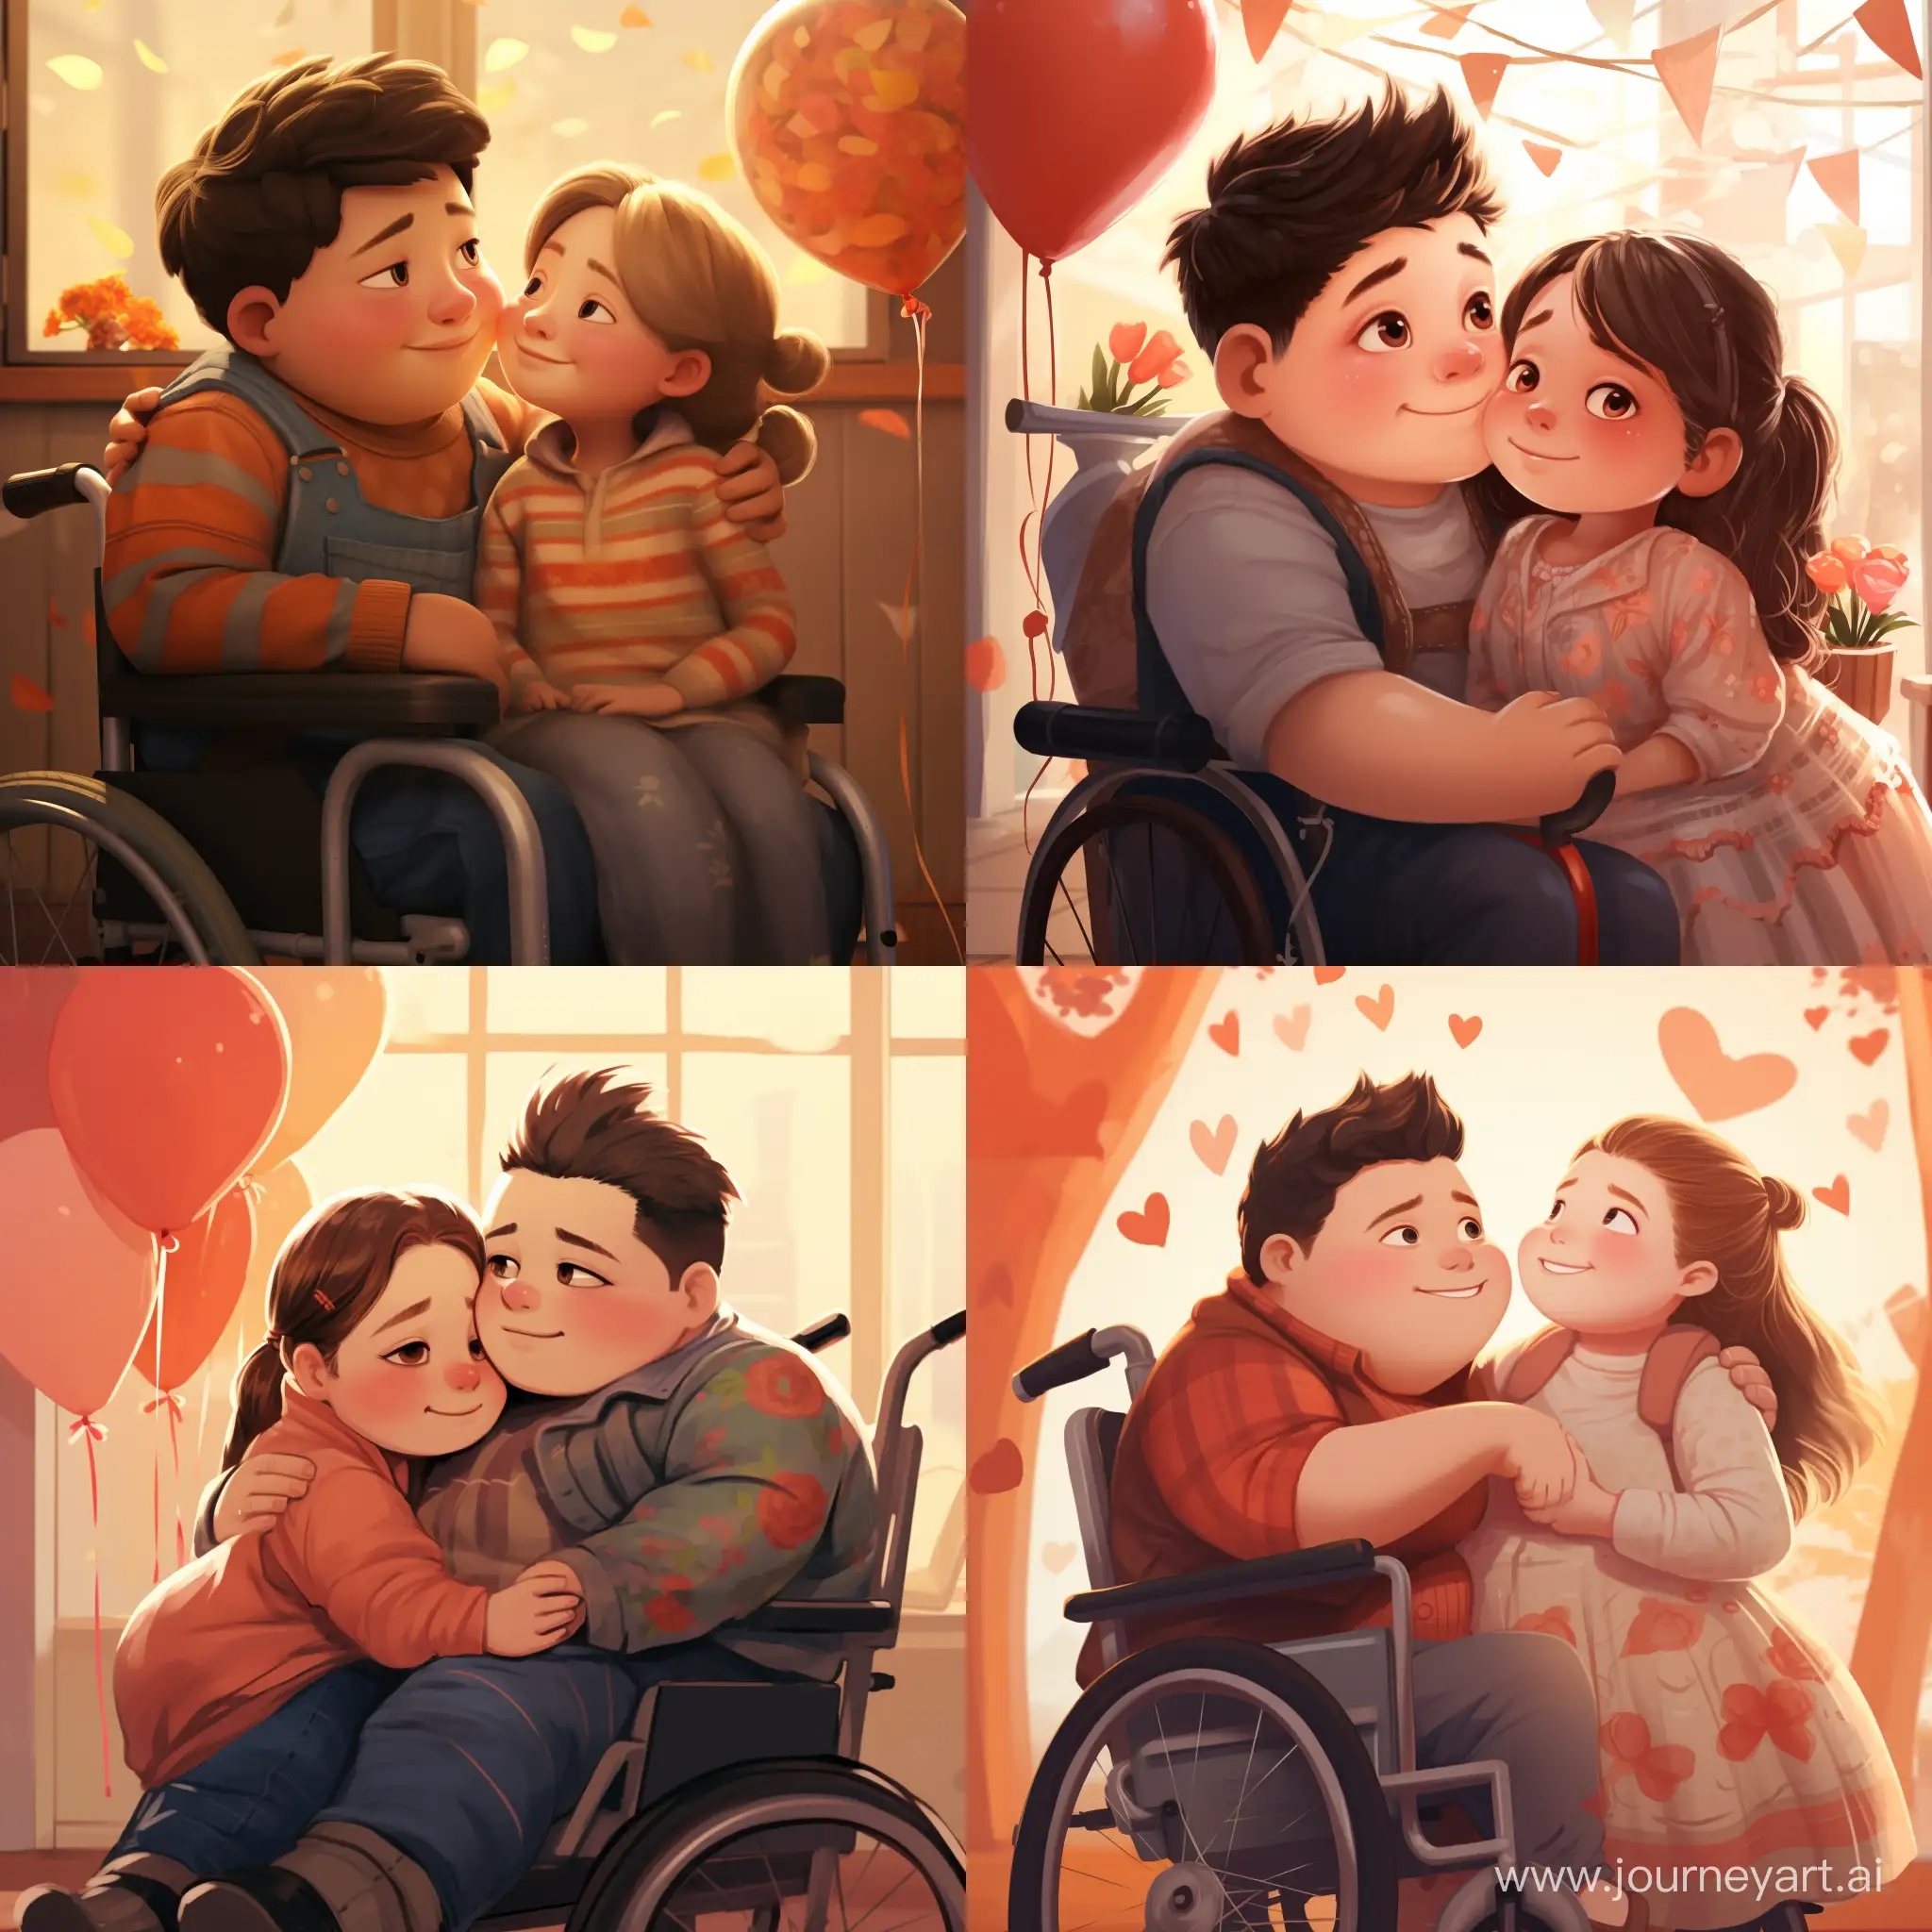 Affectionate-Chubby-Boy-Hugging-Girl-in-Wheelchair